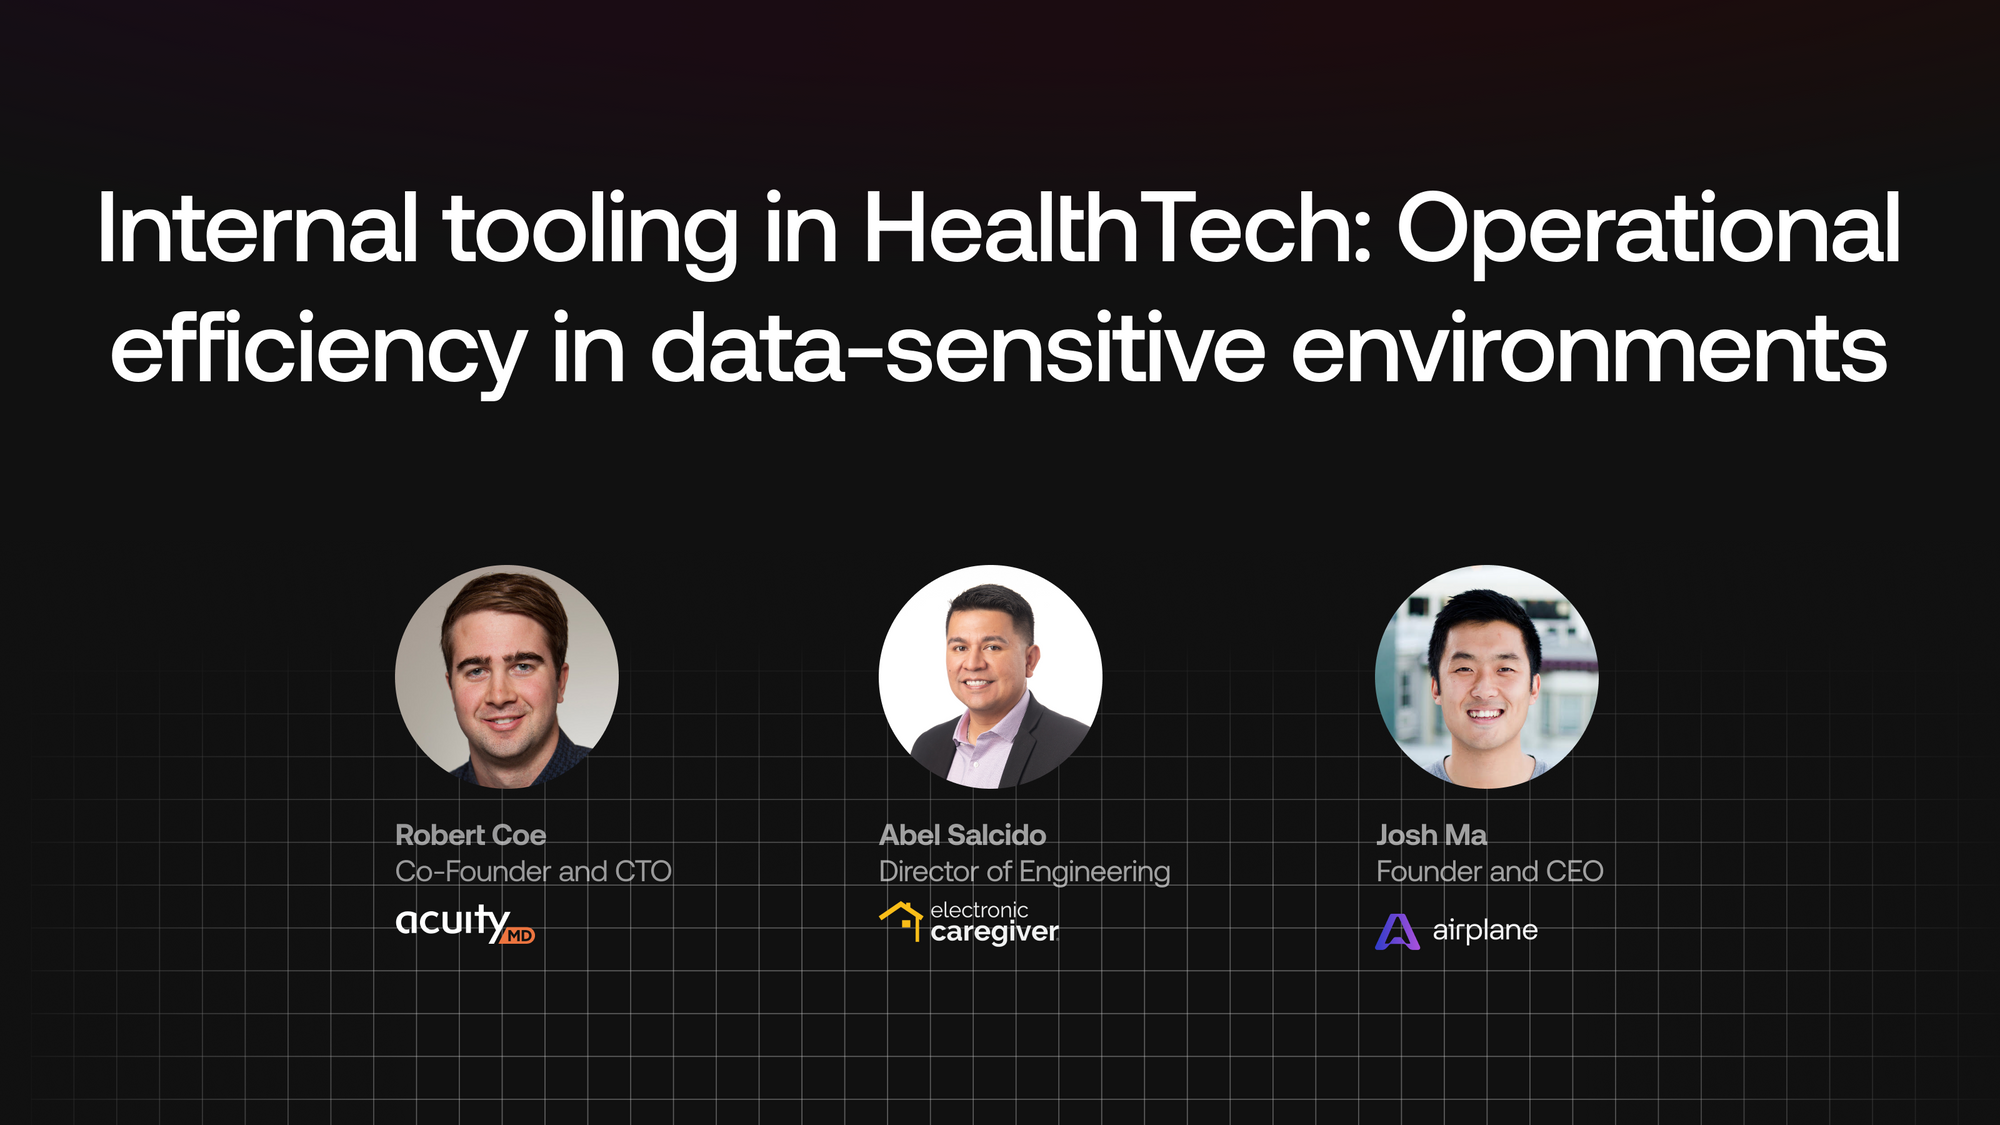 Internal tooling in HealthTech: Operational efficiency in data-sensitive environments